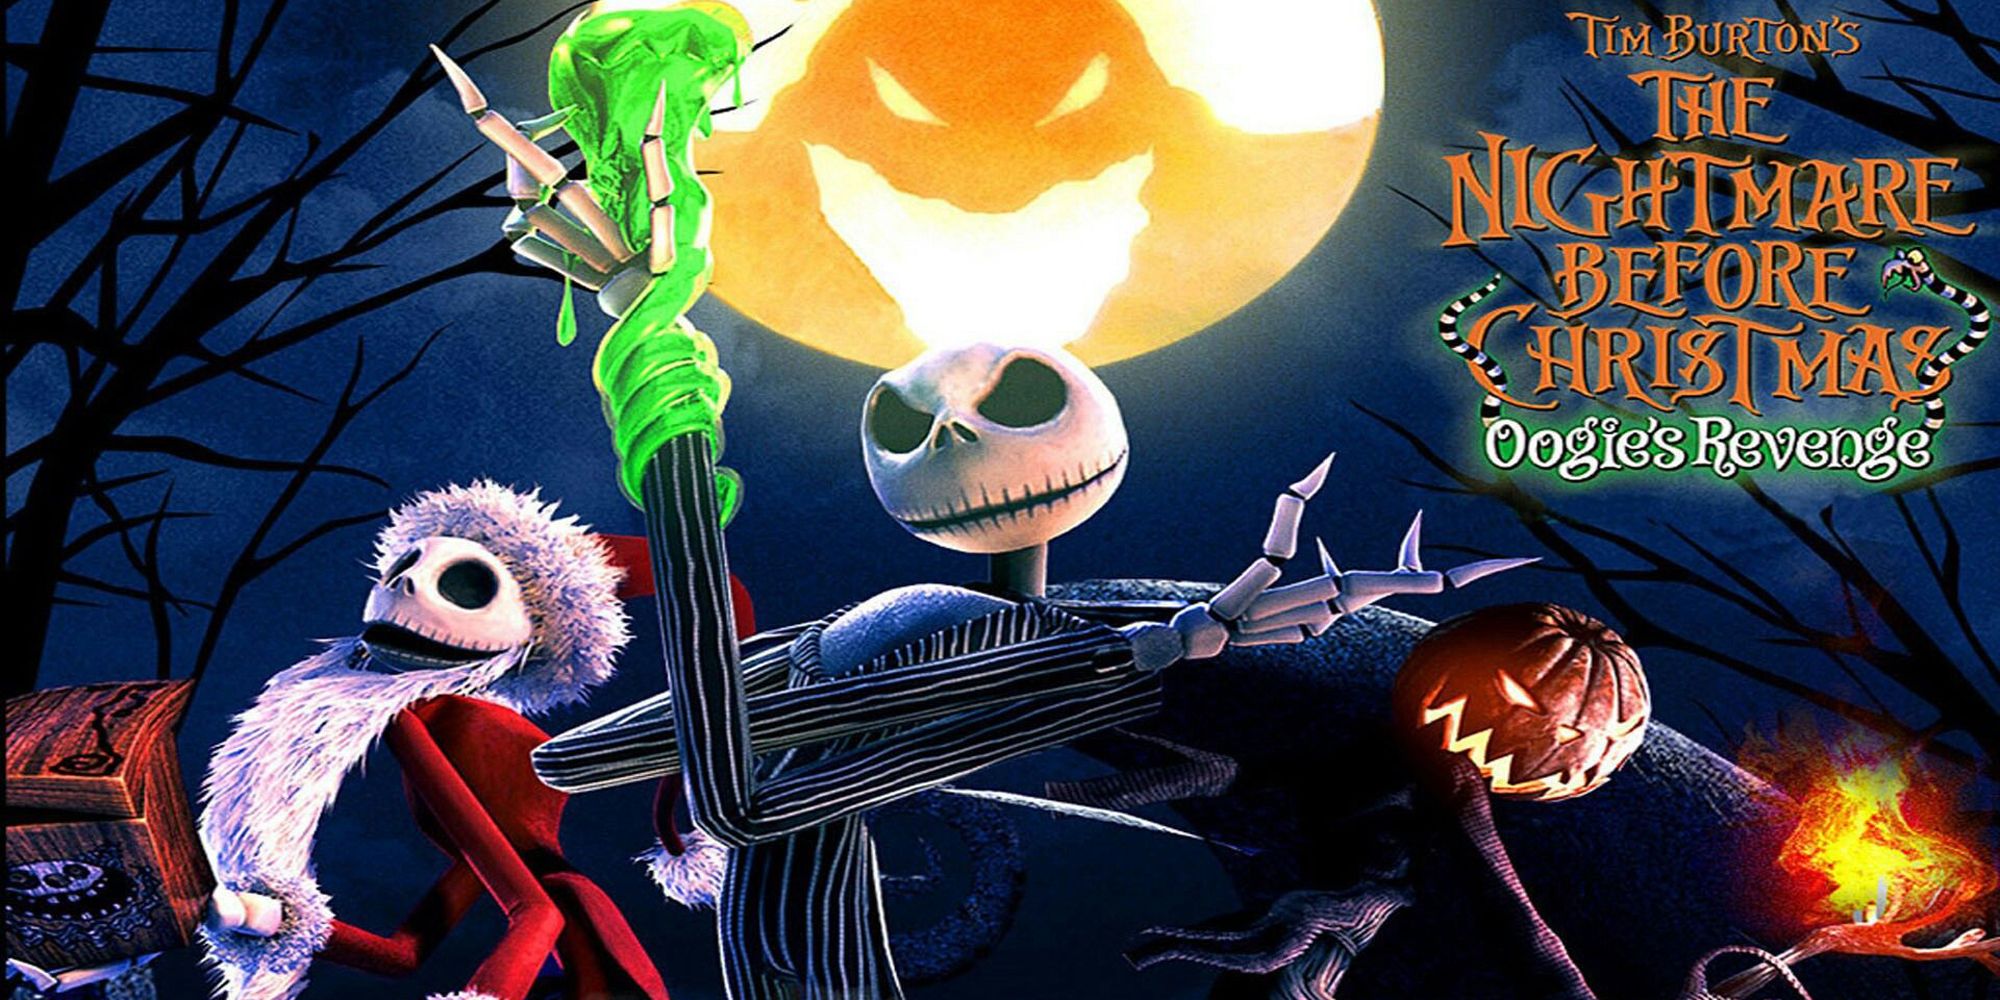 Oogie's Revenge: The Nightmare Before Christmas Sequel You've